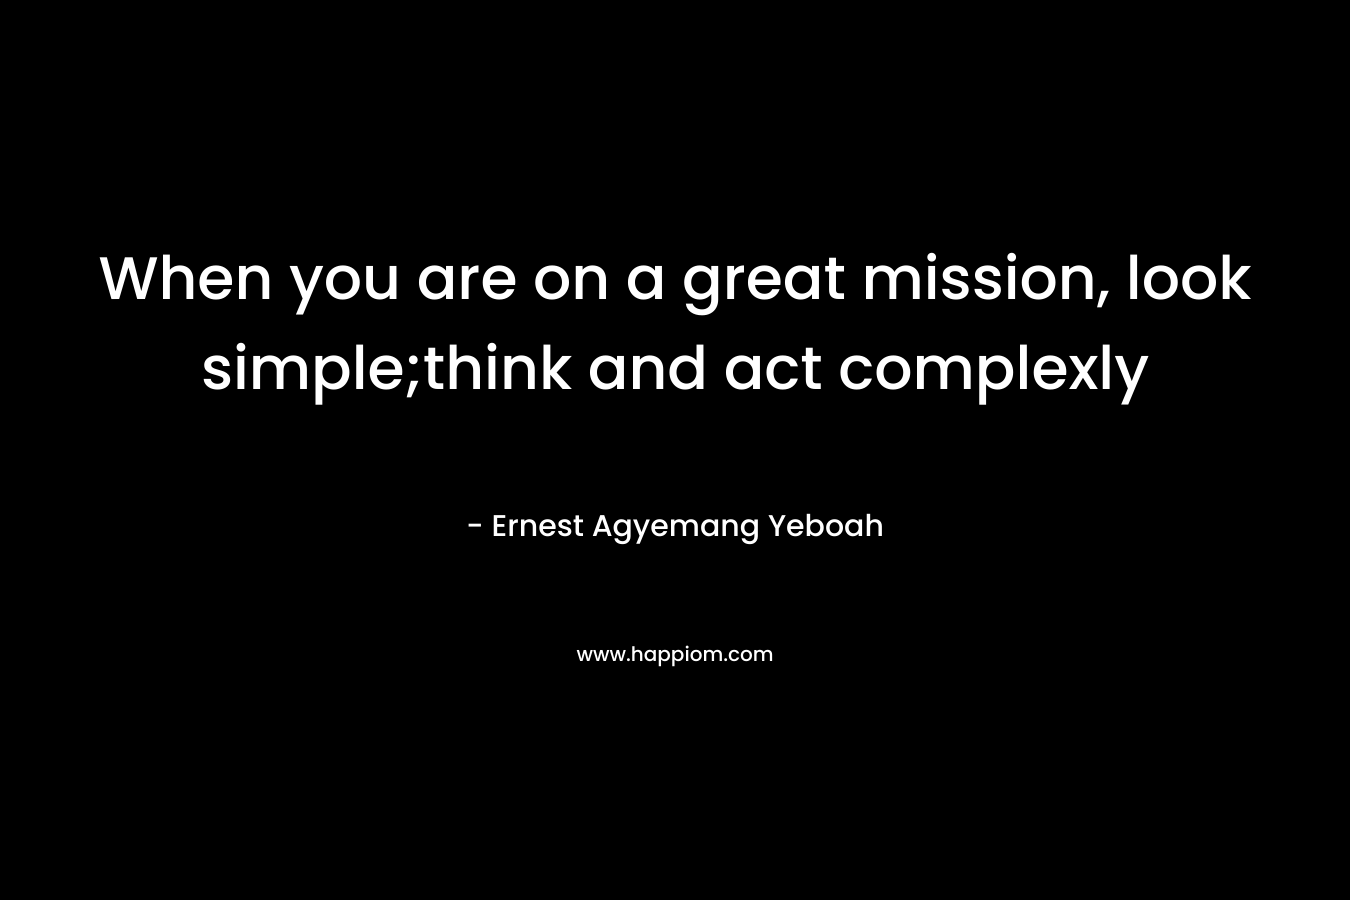 When you are on a great mission, look simple;think and act complexly